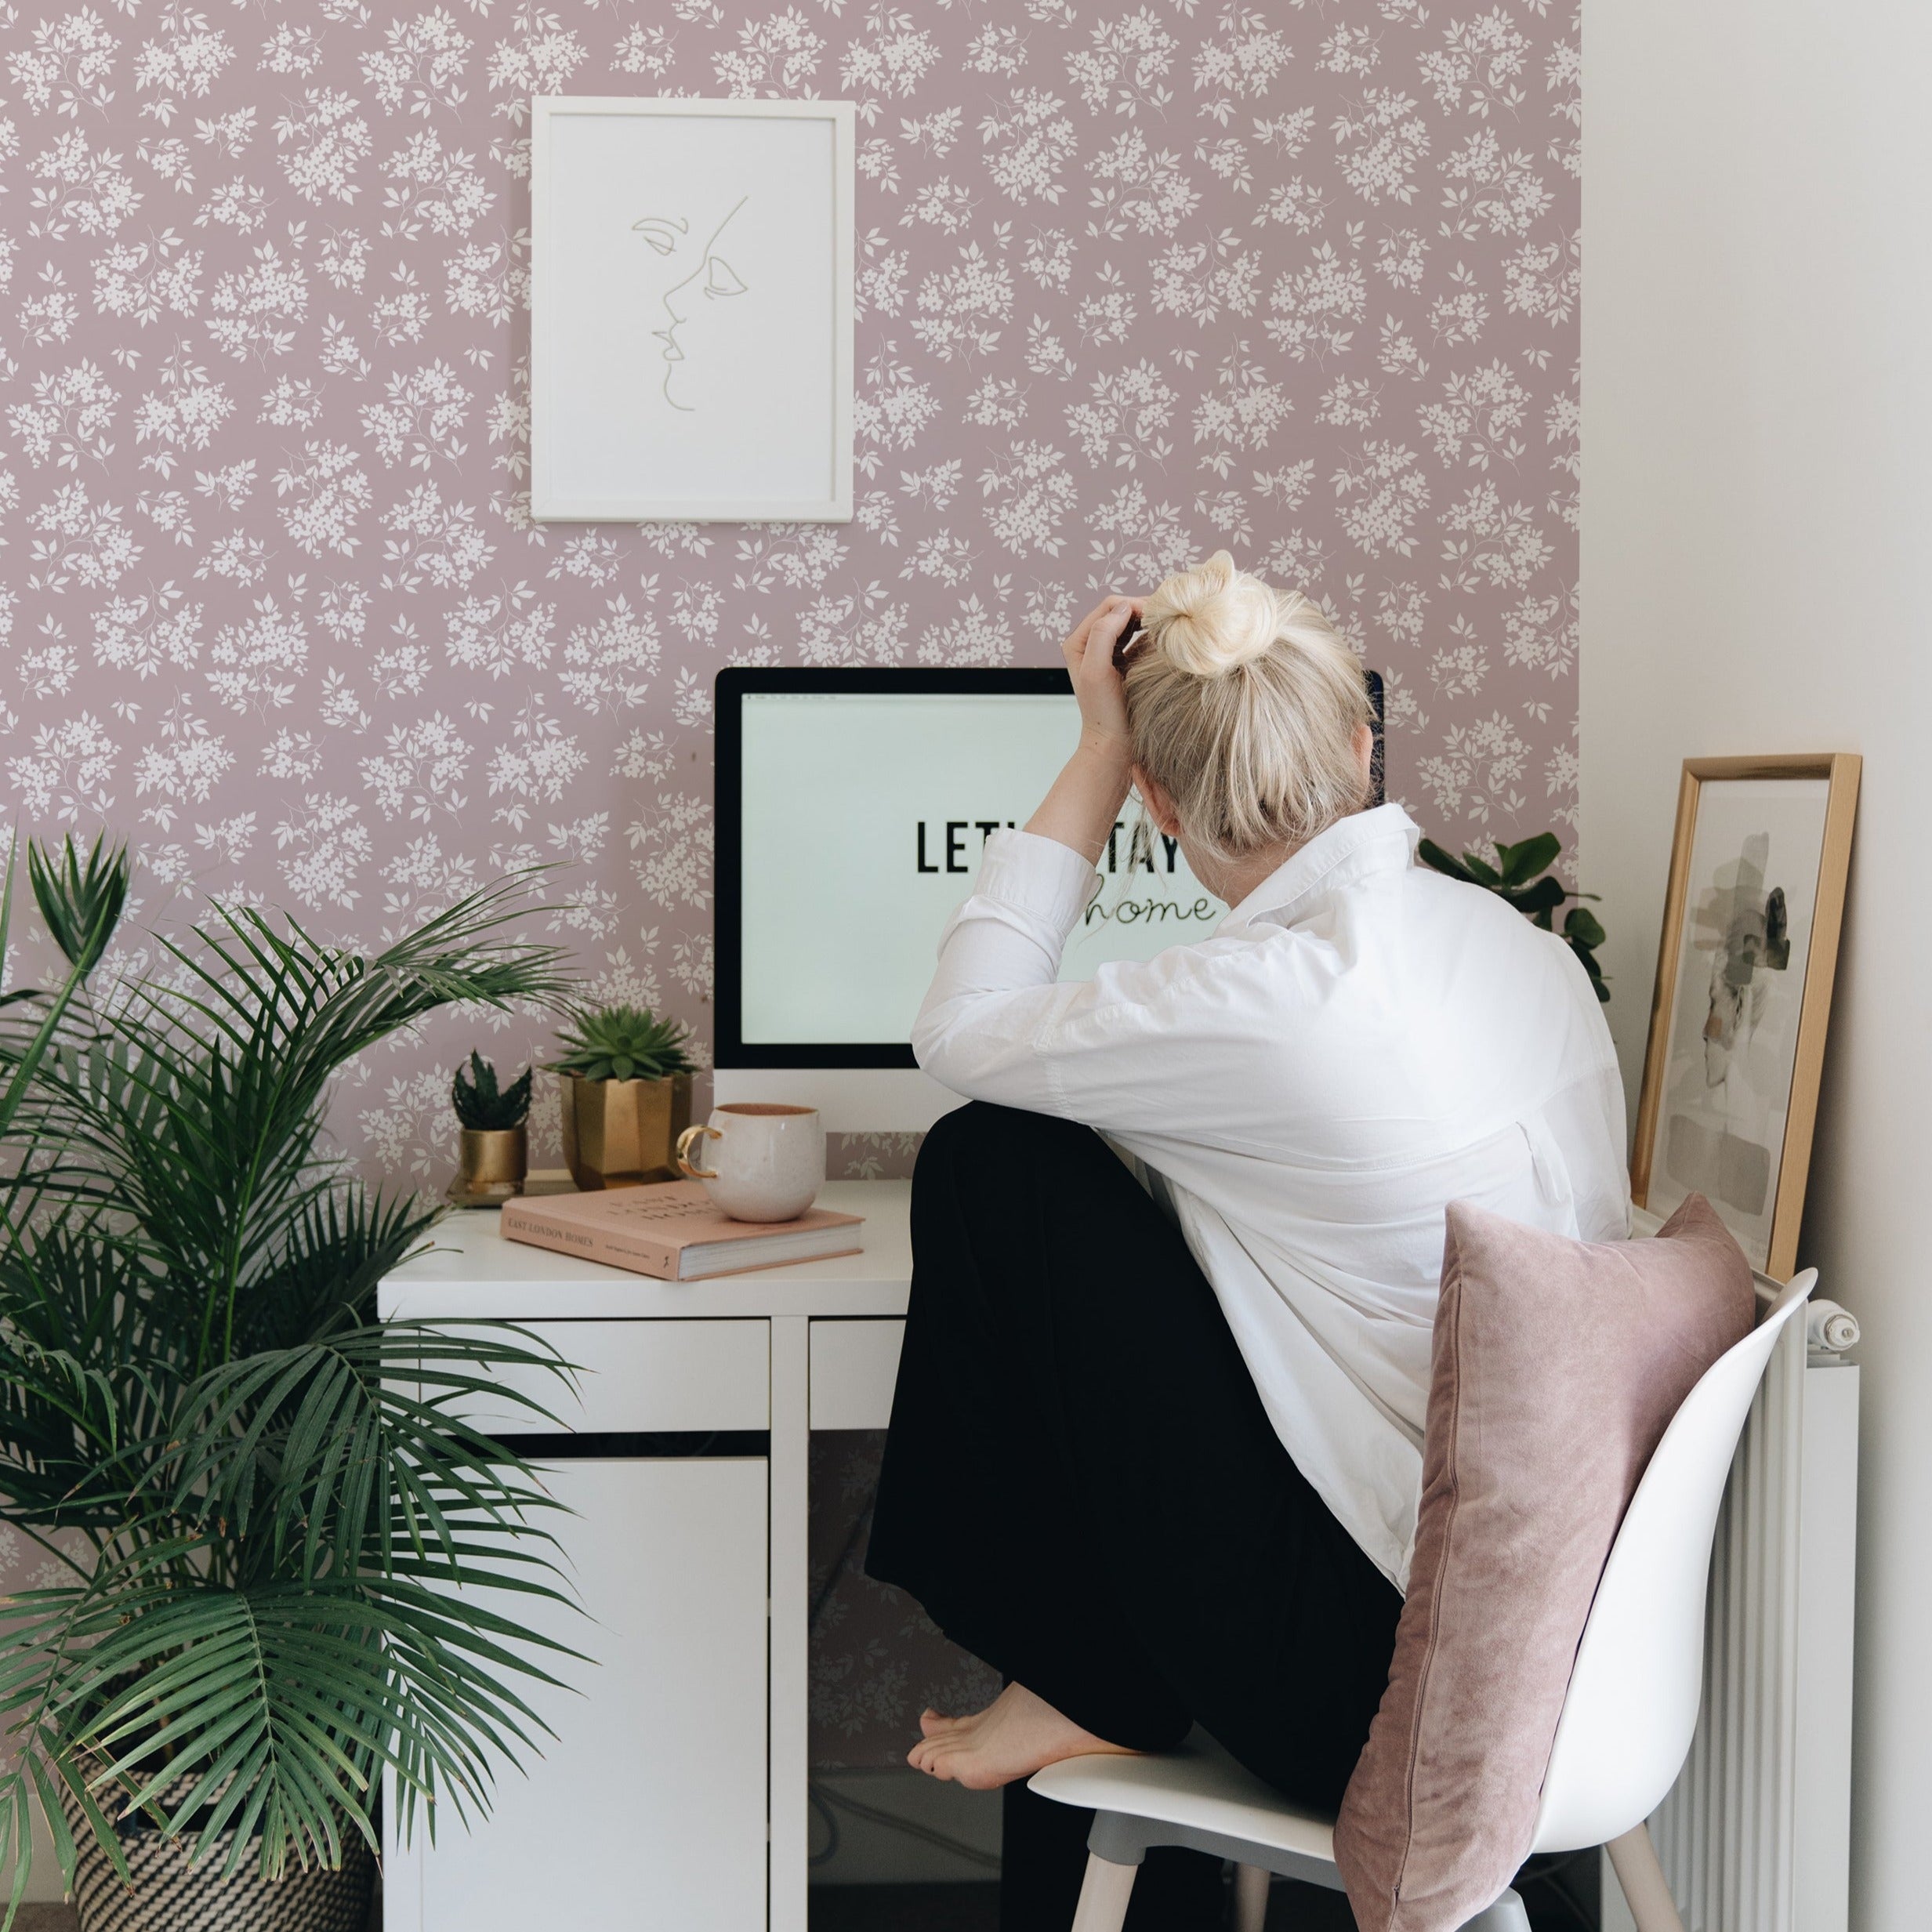 A home office setting where the Vintage Garden Floral Wallpaper is featured on a wall, providing a charming backdrop for a work environment. A person sits facing a computer with their back to the camera, creating an atmosphere of casual professionalism. The wallpaper adds a cozy and calming aesthetic to the space, complemented by indoor plants and minimalist desk accessories.